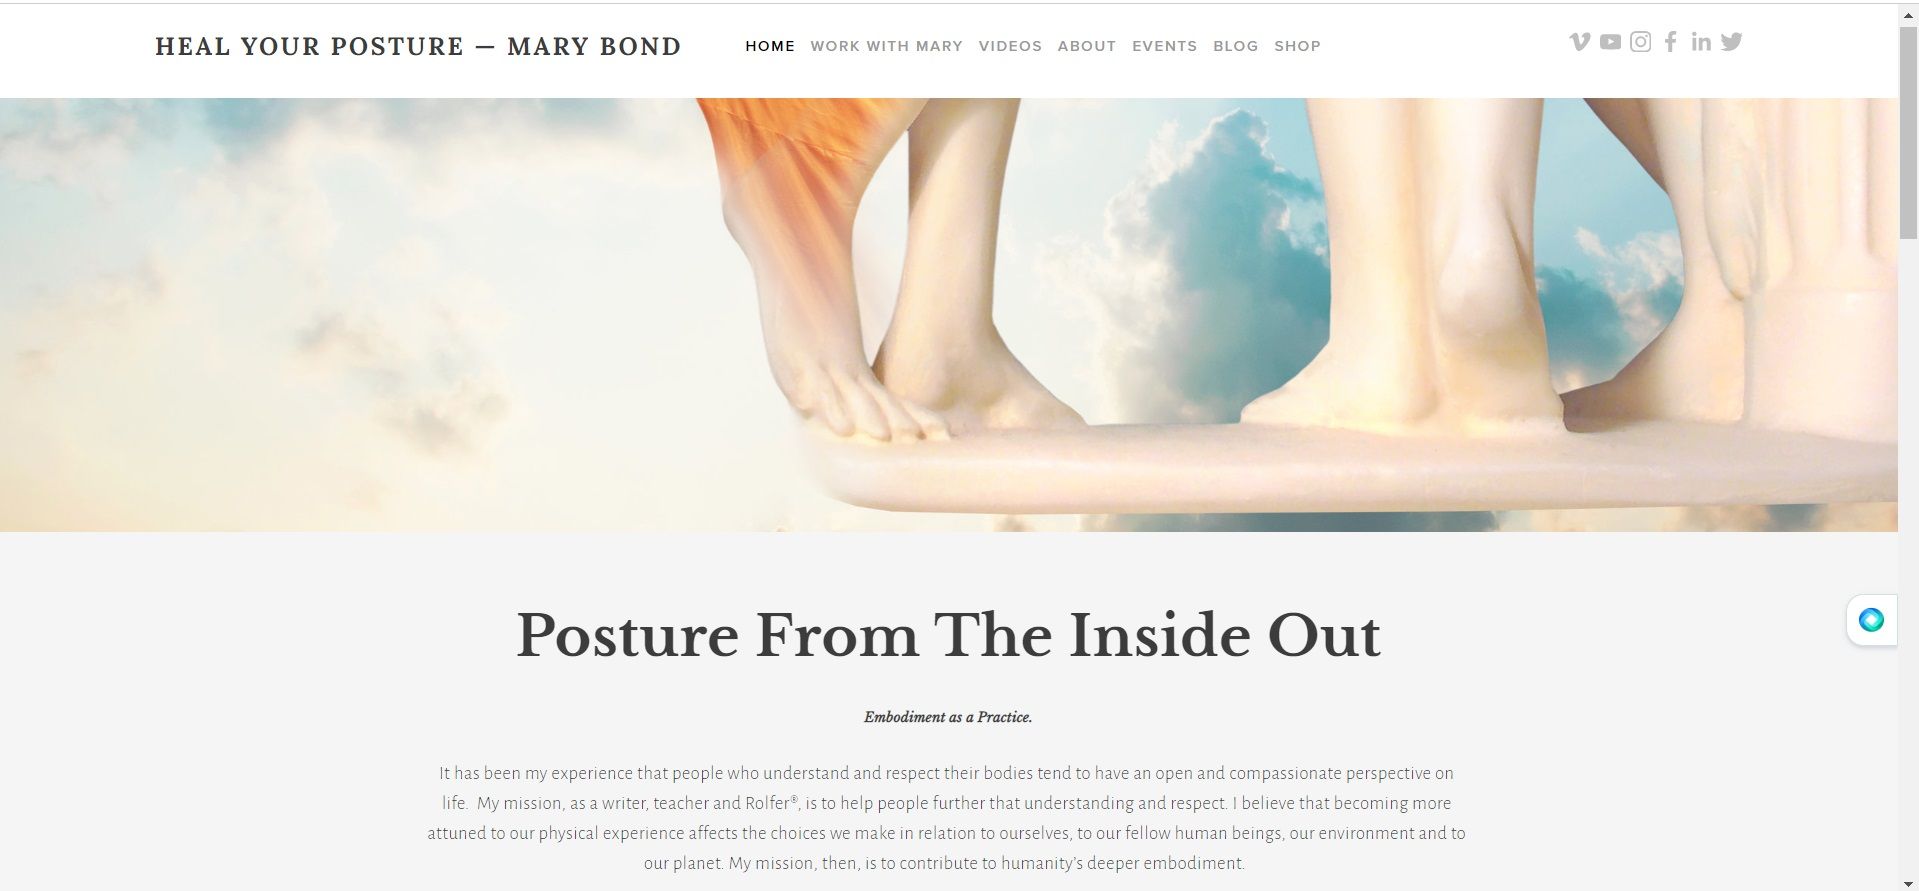 Information page on Heal Your Posture